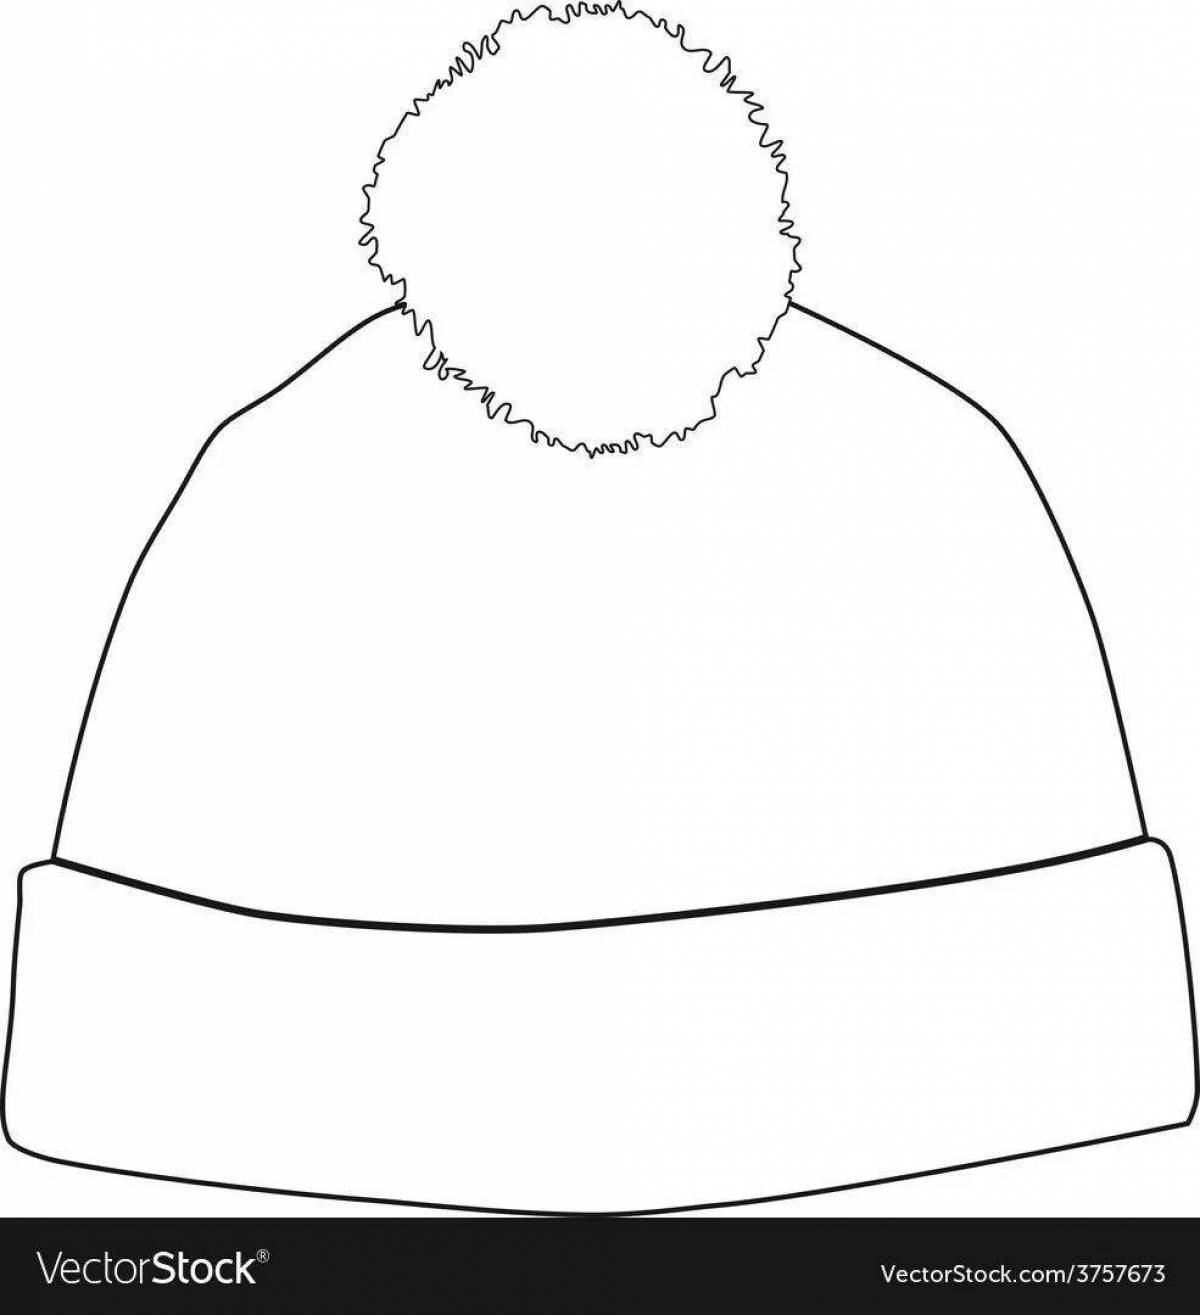 Зимняя шапка snuggly coloring page